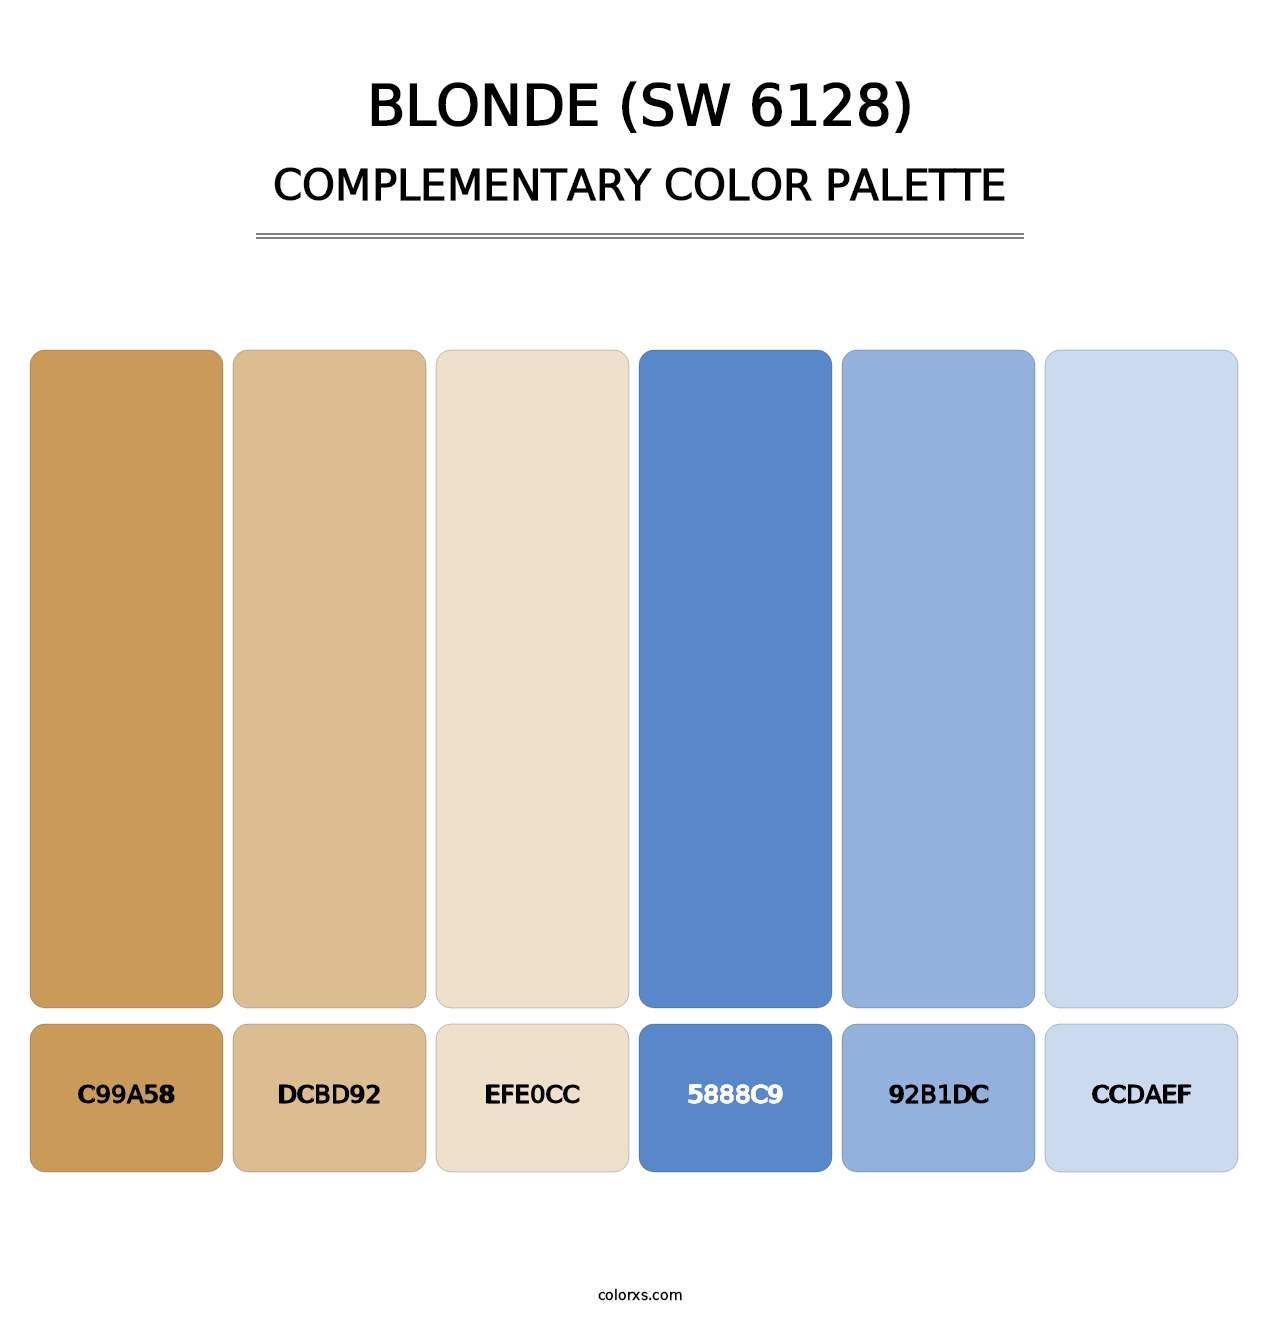 Blonde (SW 6128) - Complementary Color Palette